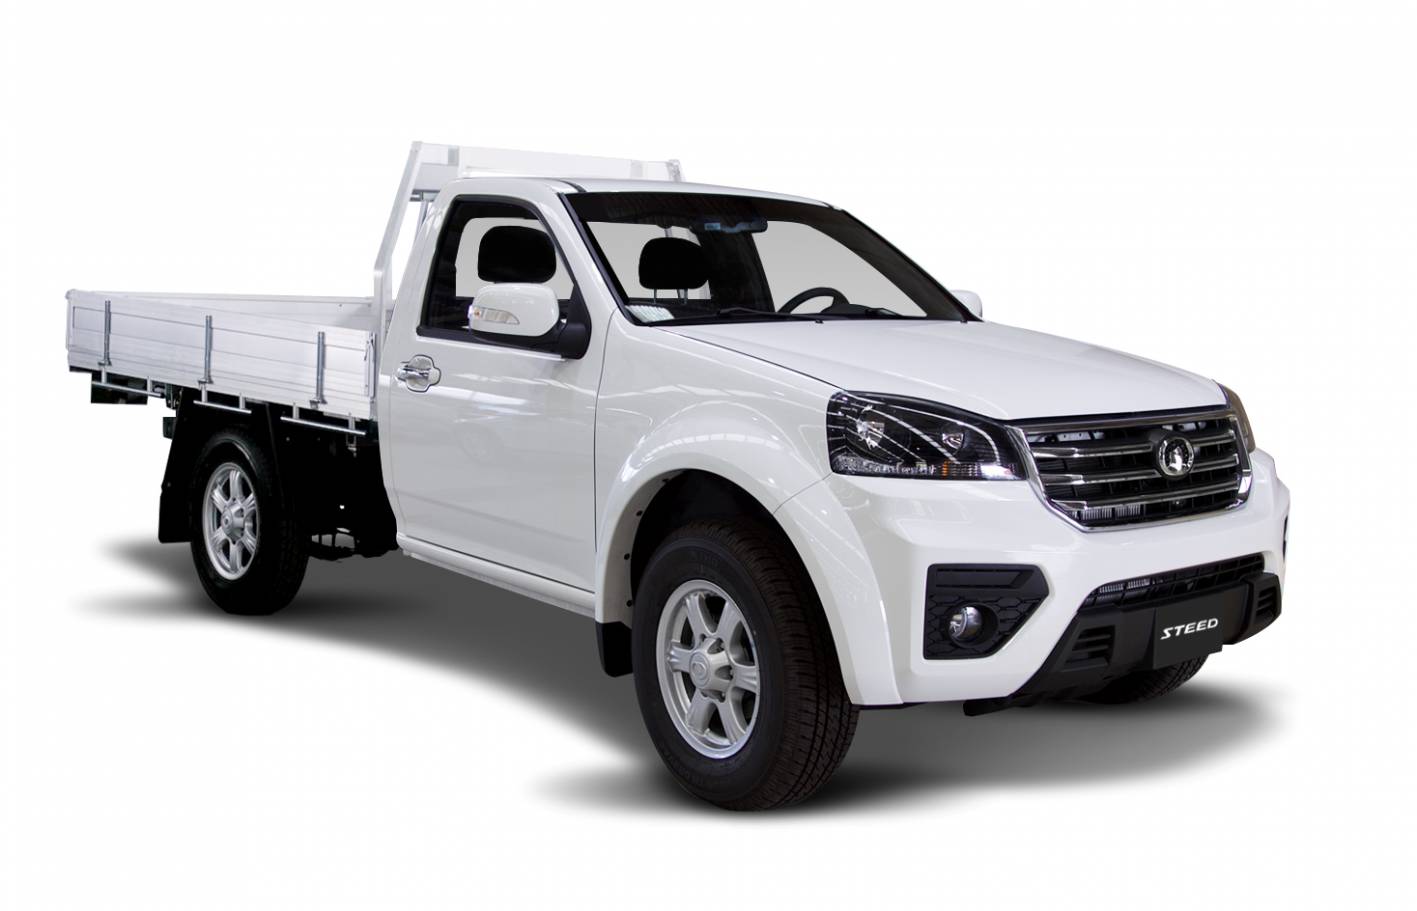 2018 Great Wall Steed Single Cab launches from $18,990